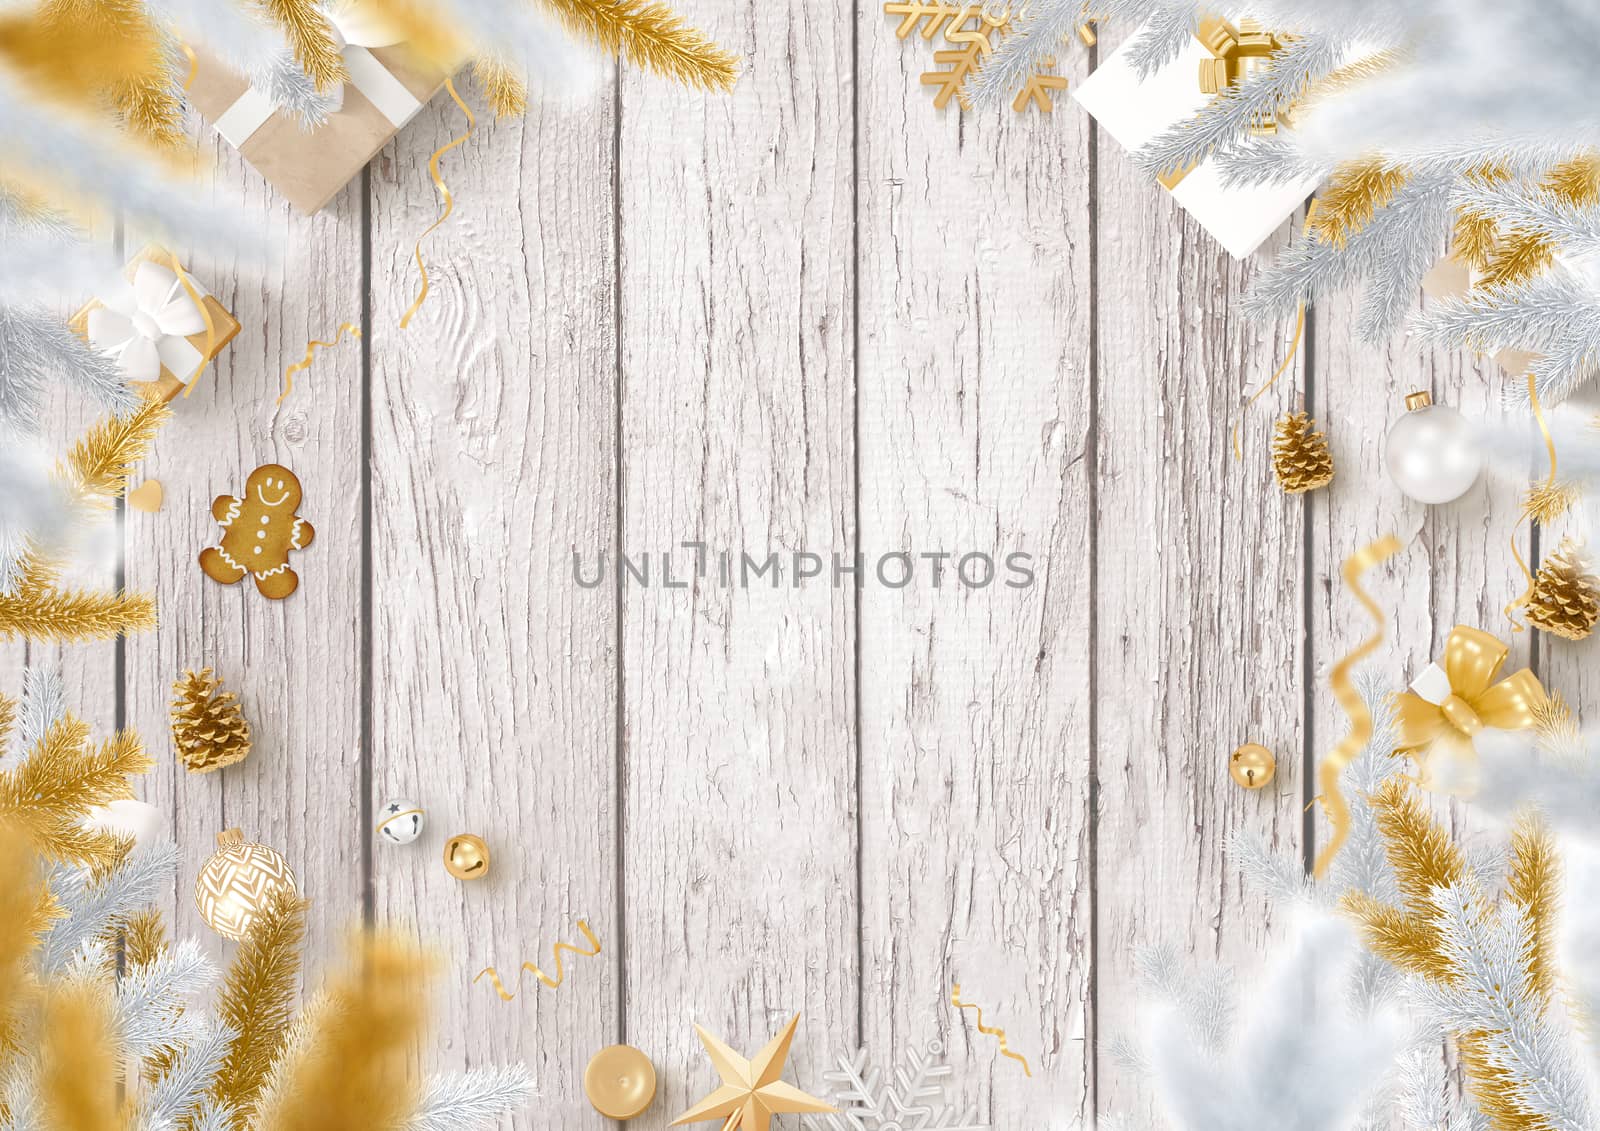 The Christmas decoration border and woodgrain background